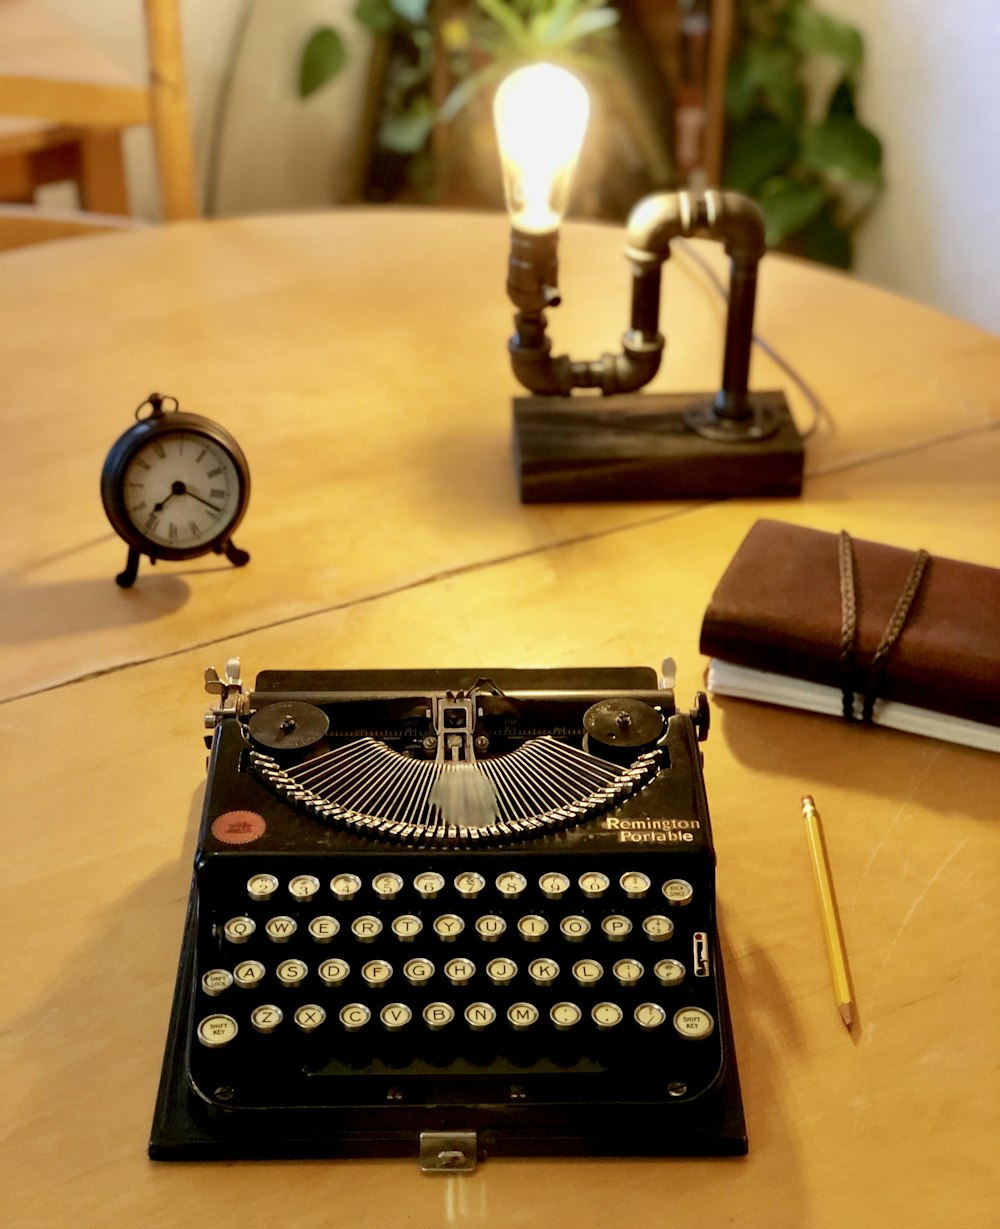 black typewriter machine beside yellow pencil, brown book, alarm clock and steam punk desk lamp on table